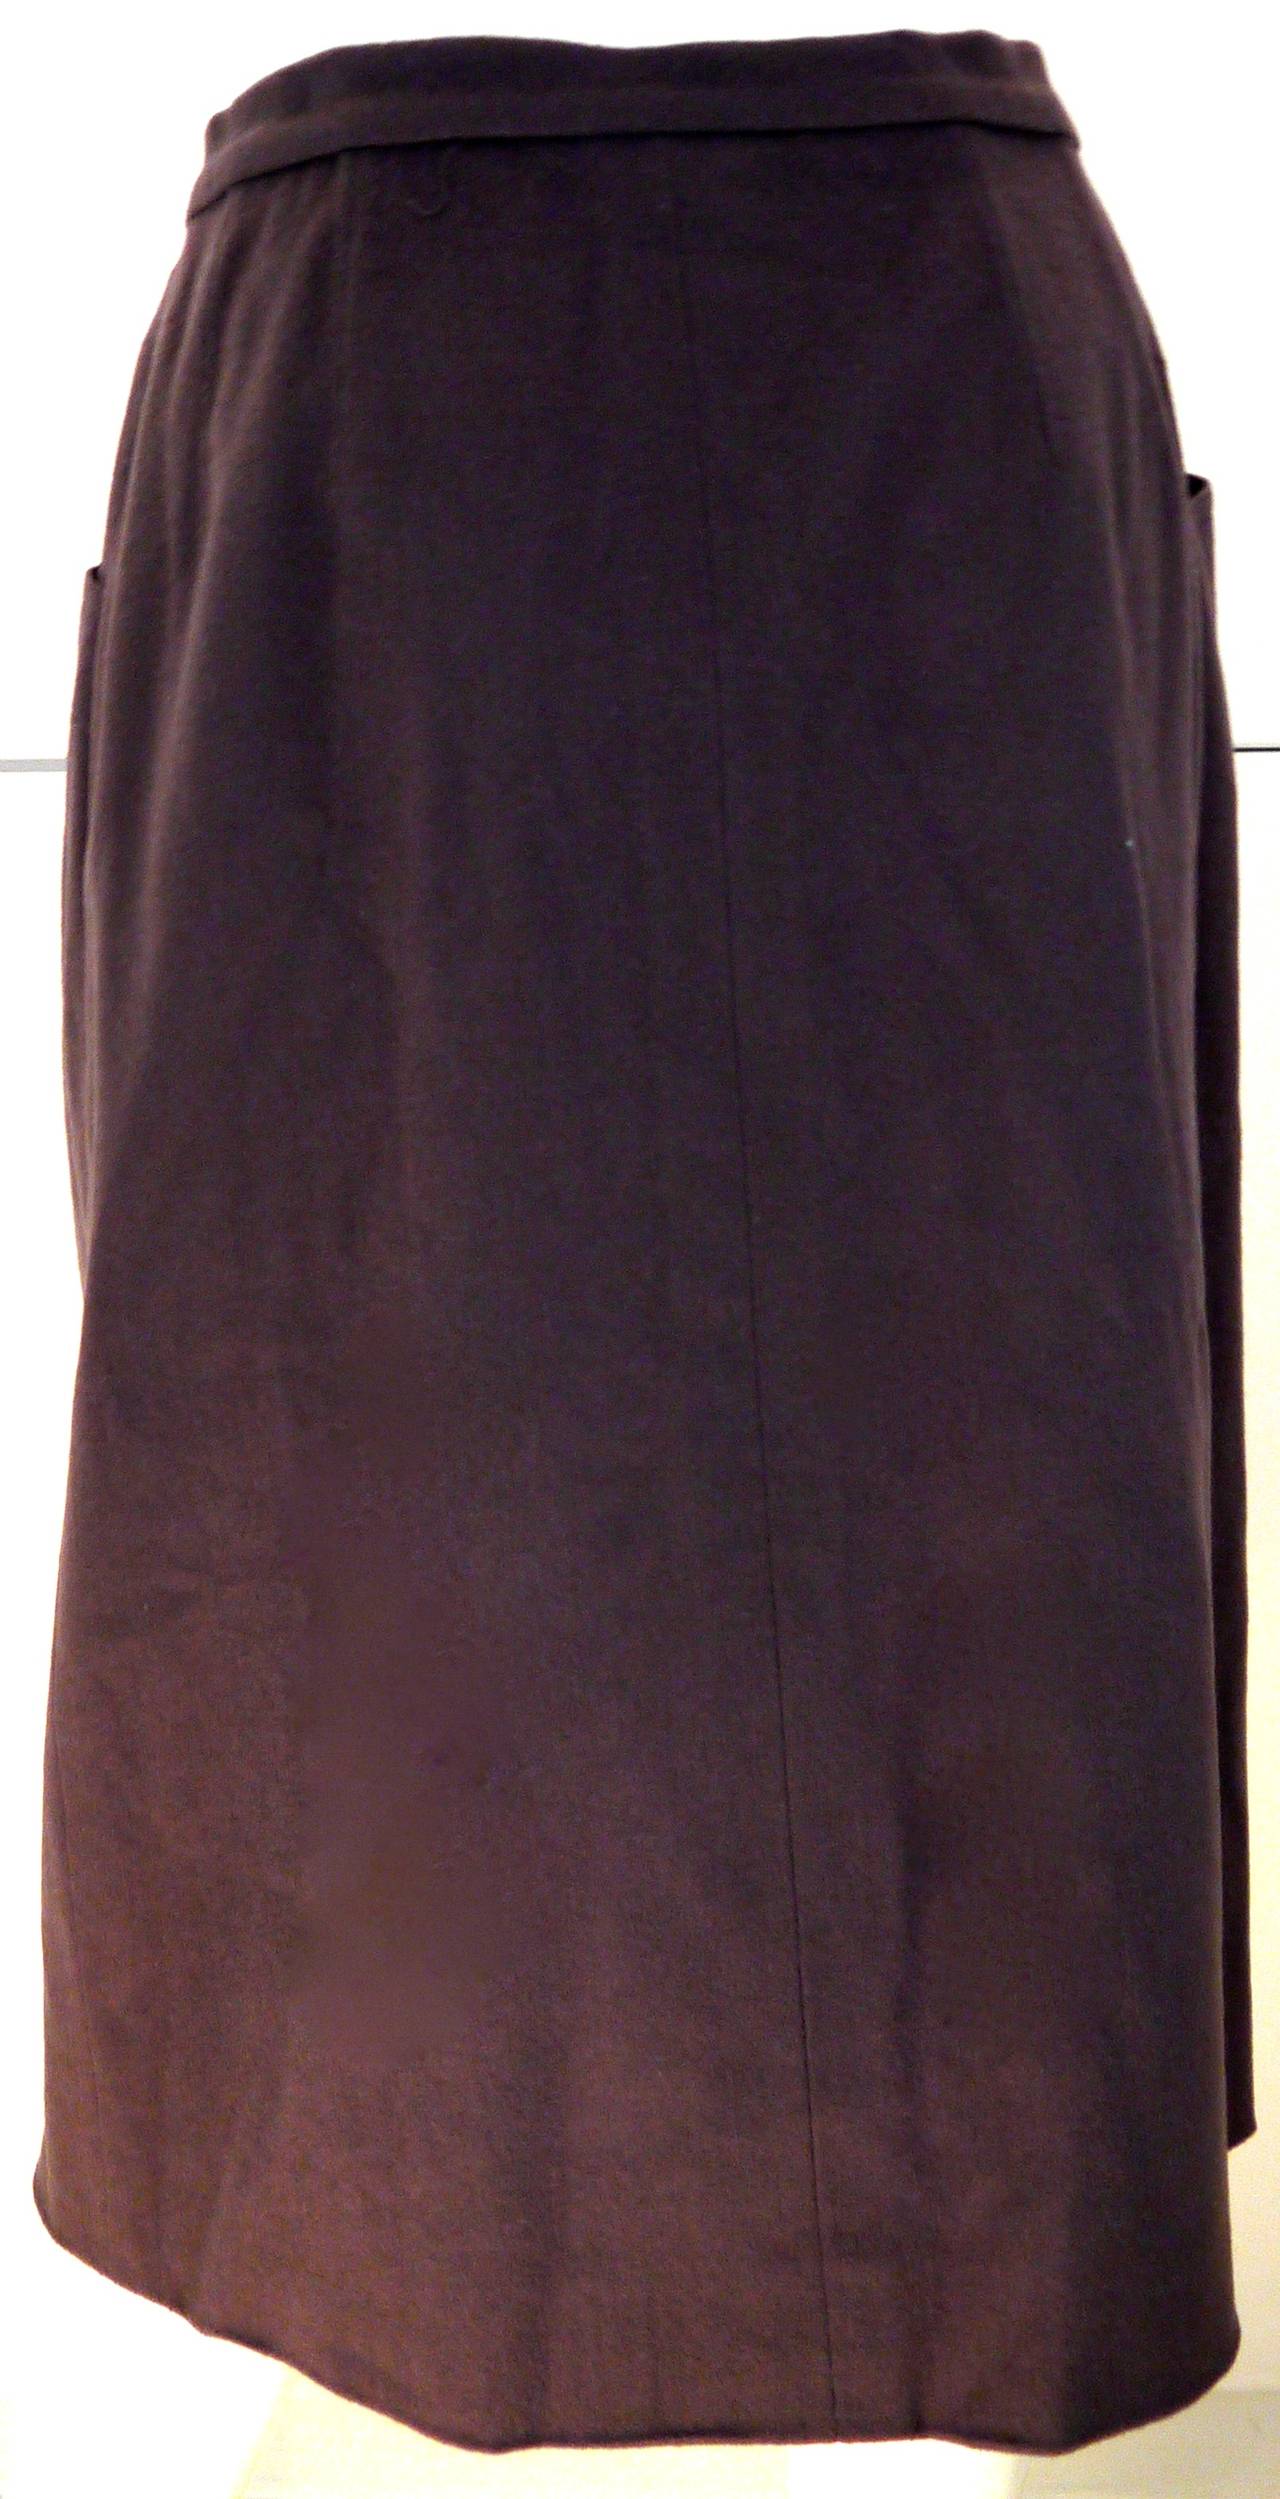 Presented here is a beautiful cashmere wool Chanel boutique ash brown skirt. Wool and cashmere blend that is lined in silk. There are two buttons at the top of the skirt with the iconic CC logo. With the 2 front buttons and pockets, there are easy